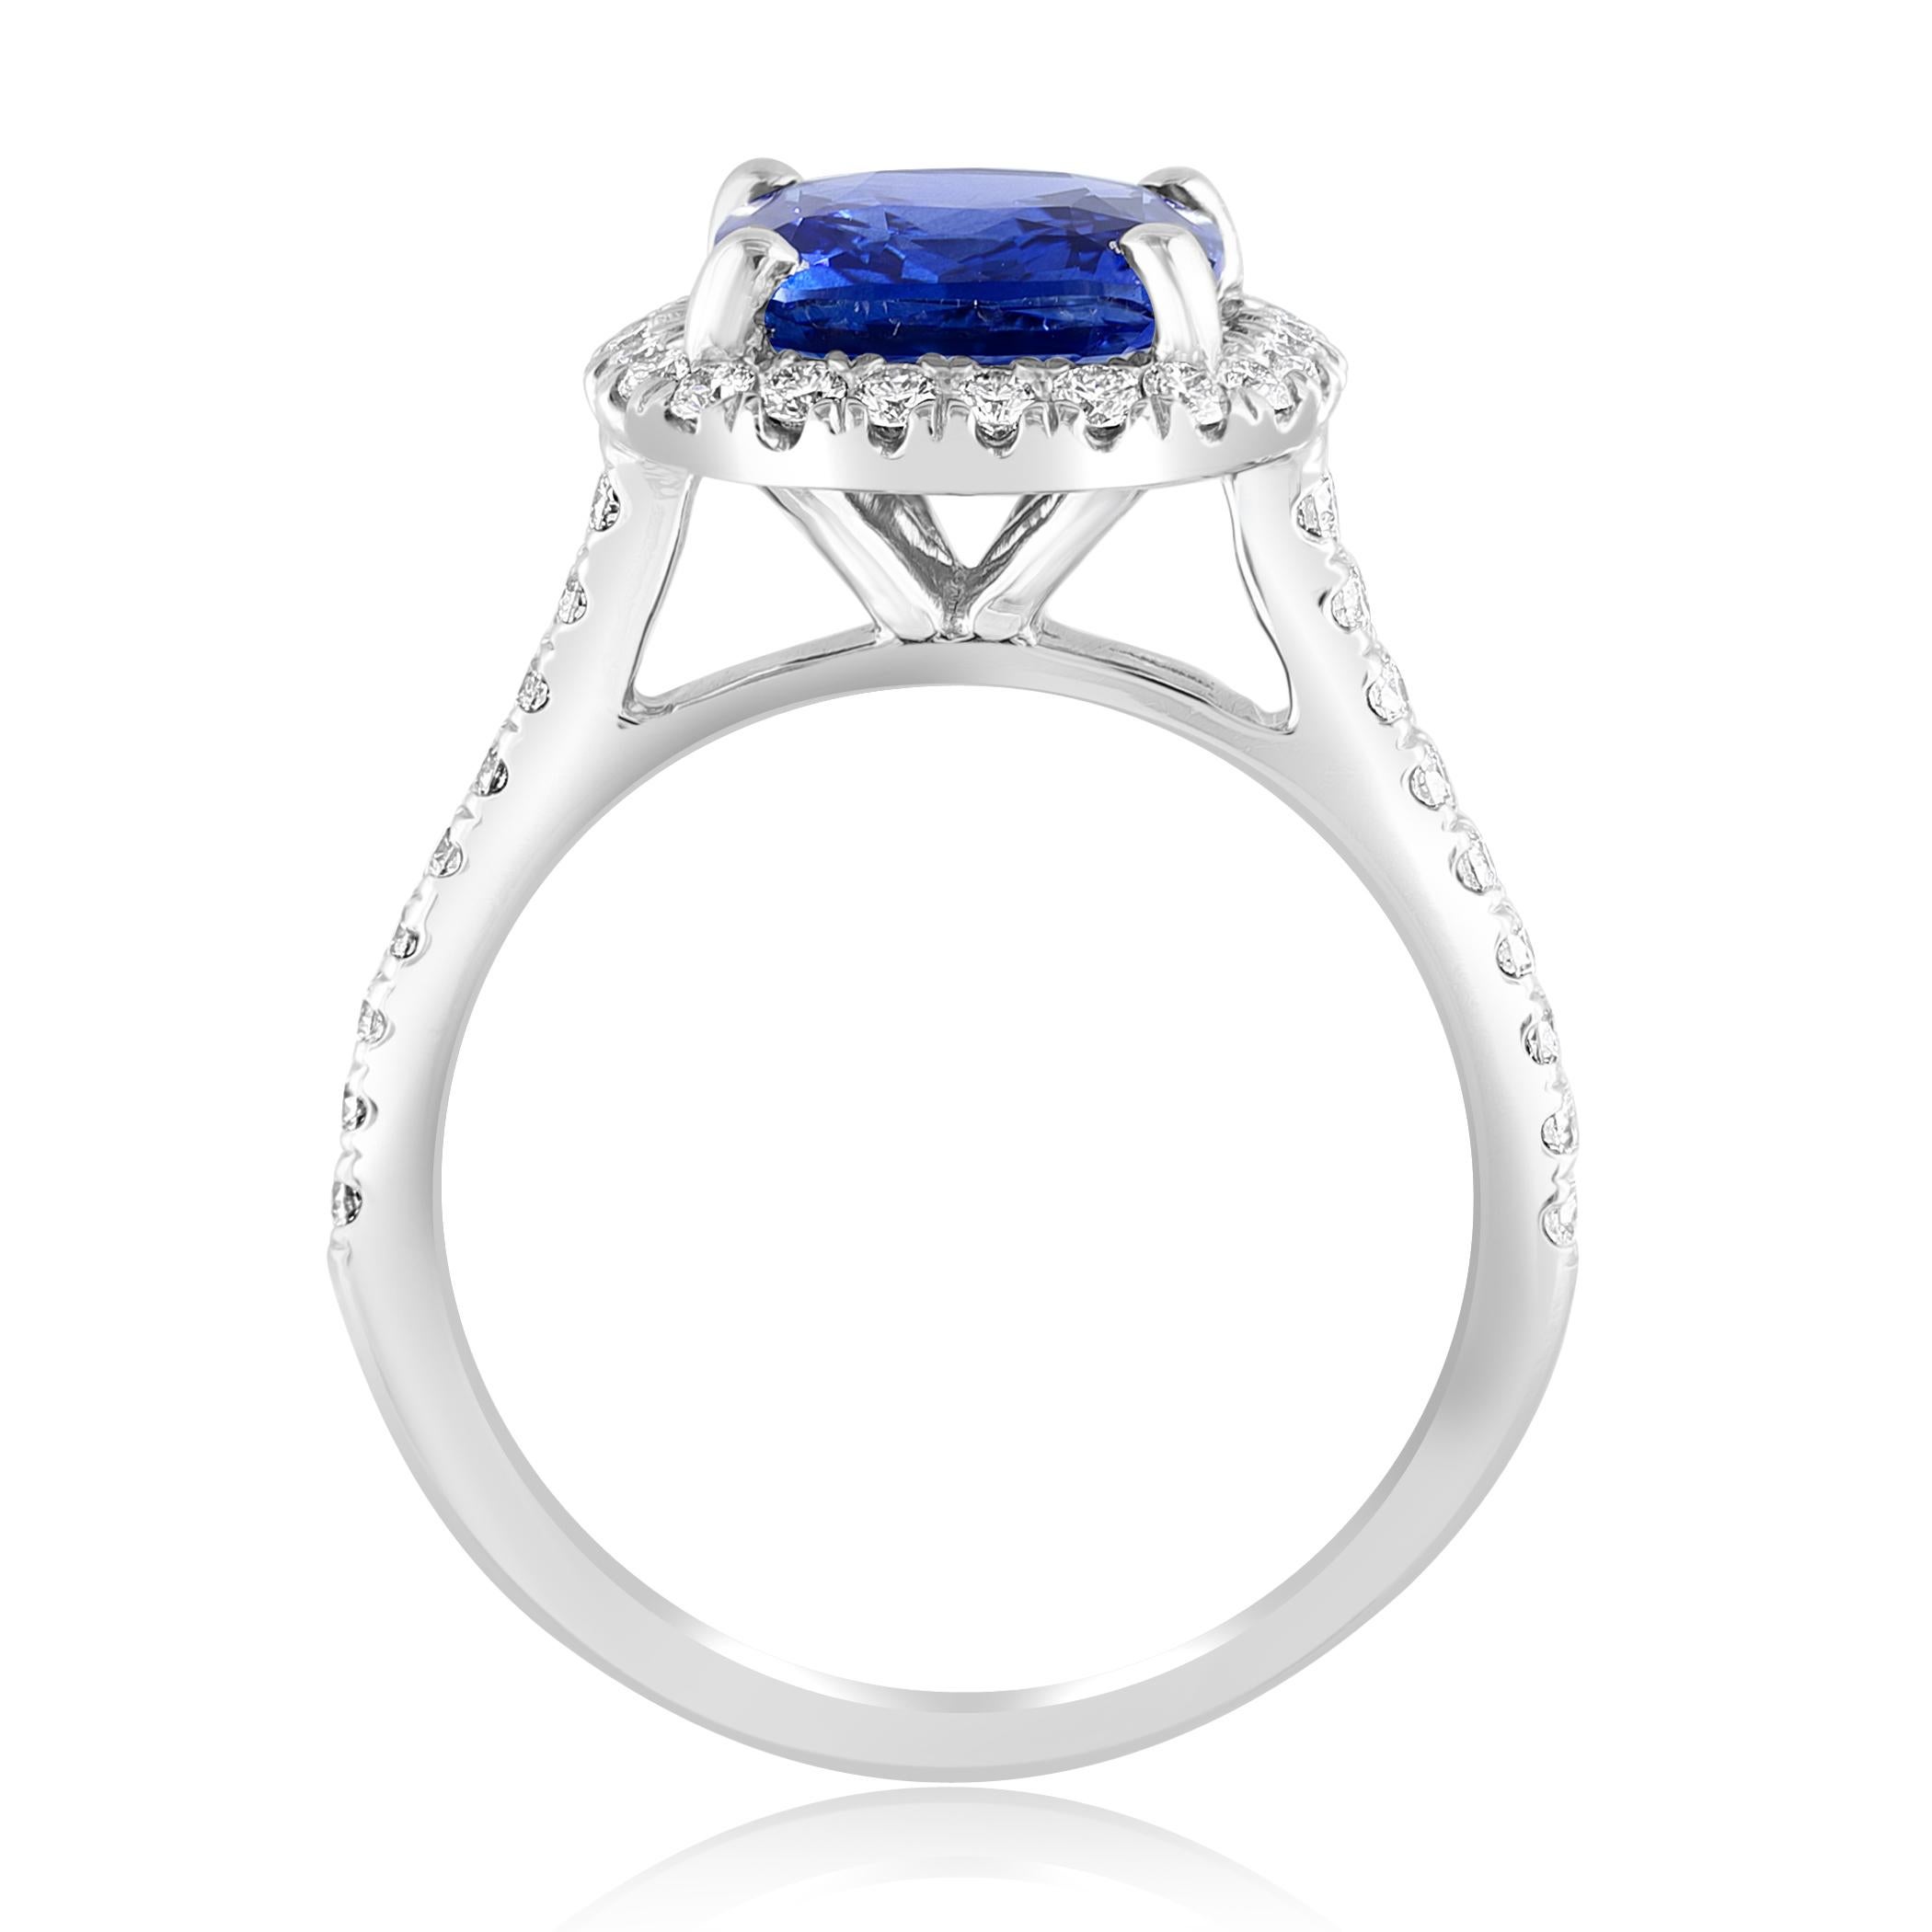 Modern 3.07 Carat Cushion Cut Sapphire and Diamond Halo Ring in Platinum For Sale